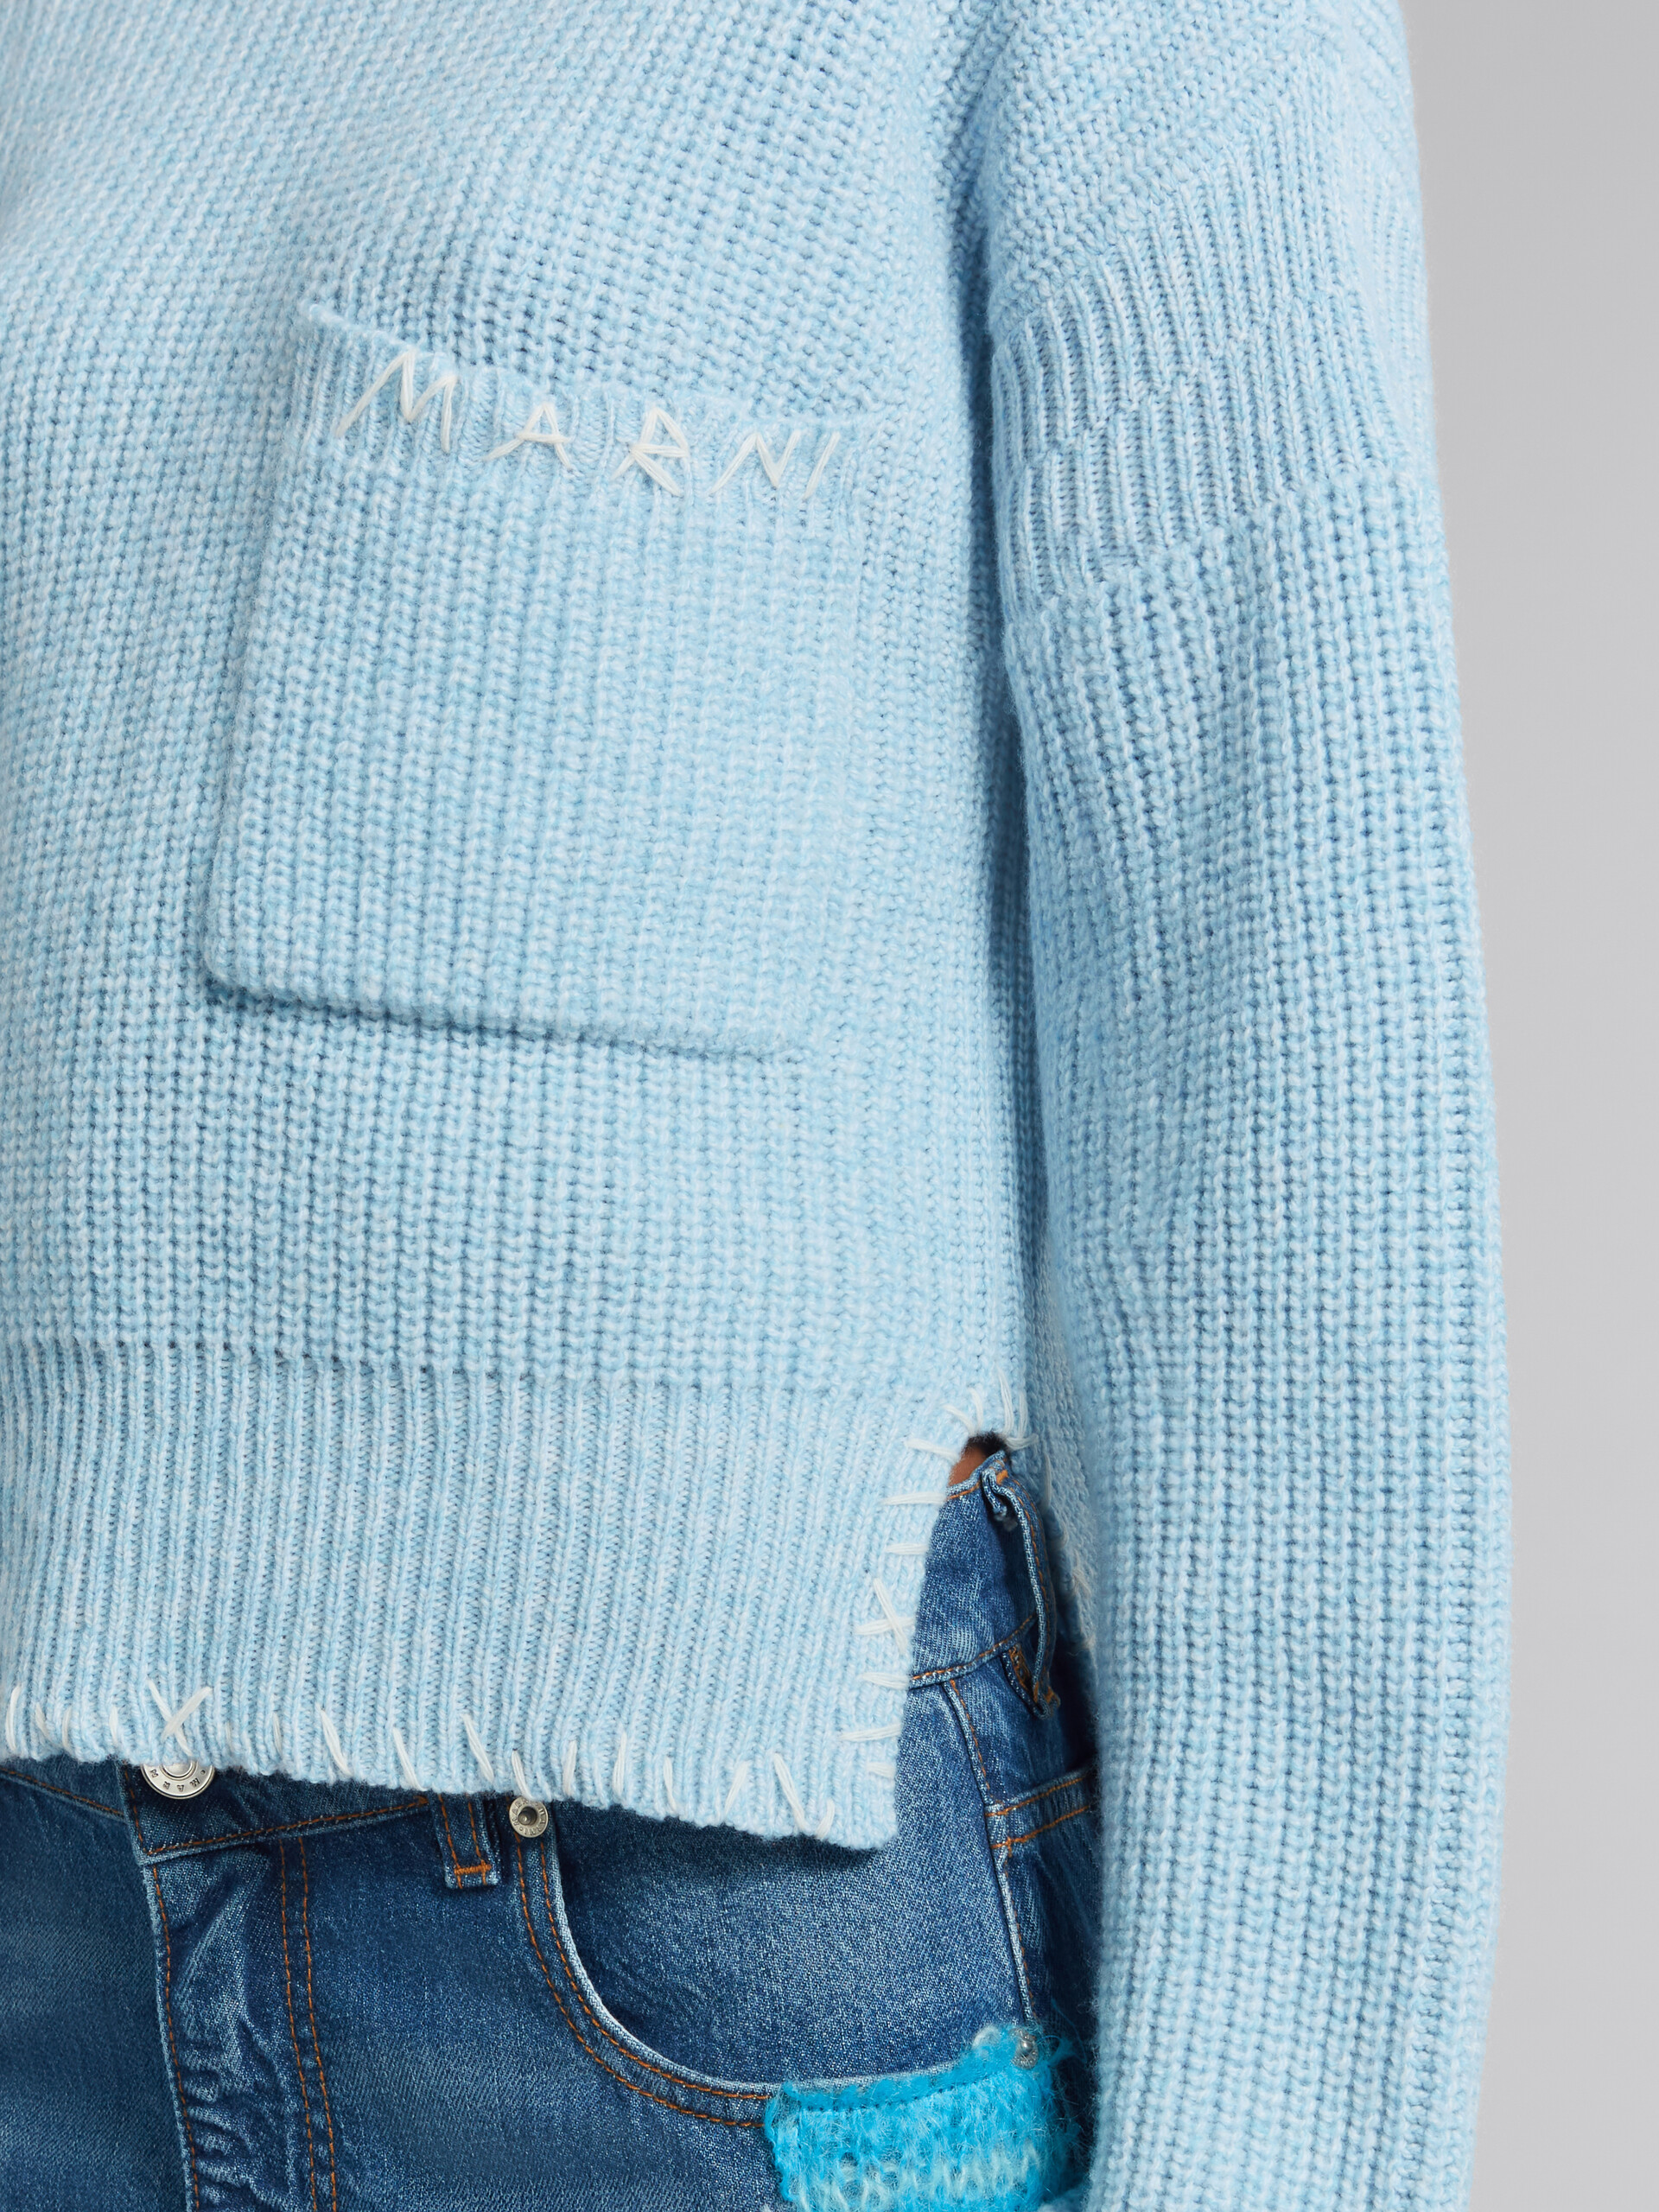 Blue mouliné jumper with mending - Pullovers - Image 4